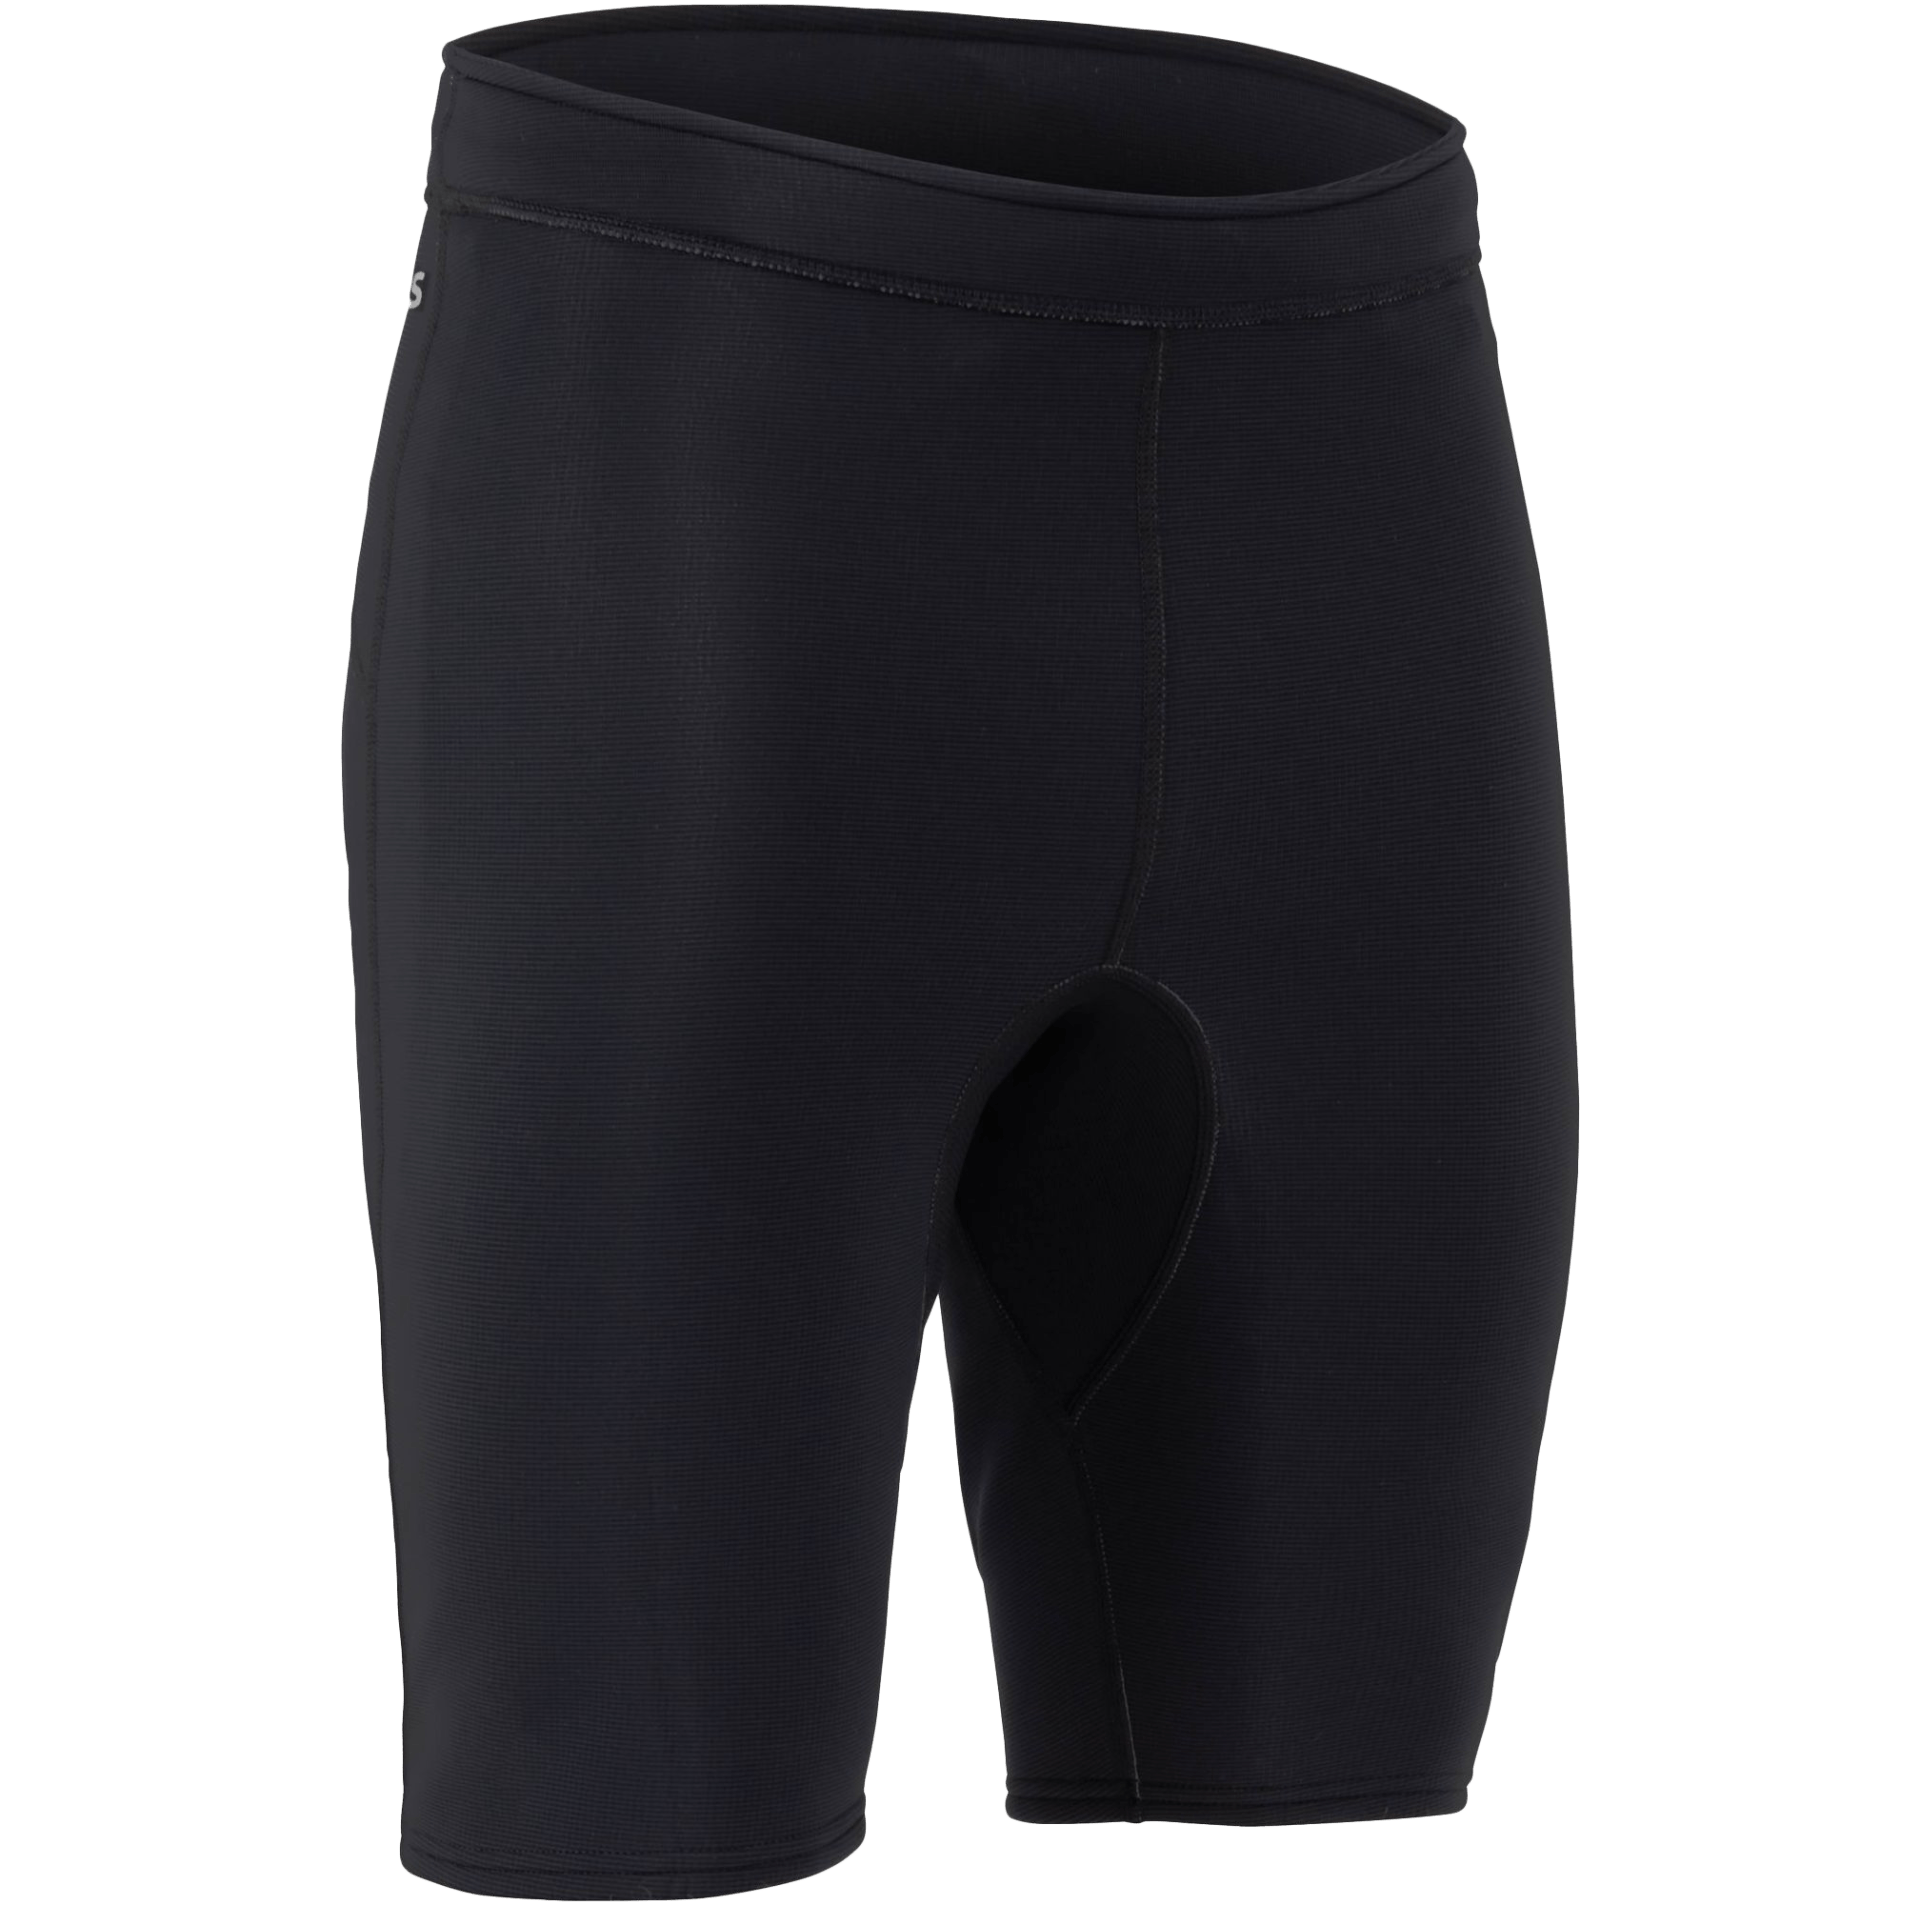 nrs_mens_hydroskin_05mm_short_right_angle.png